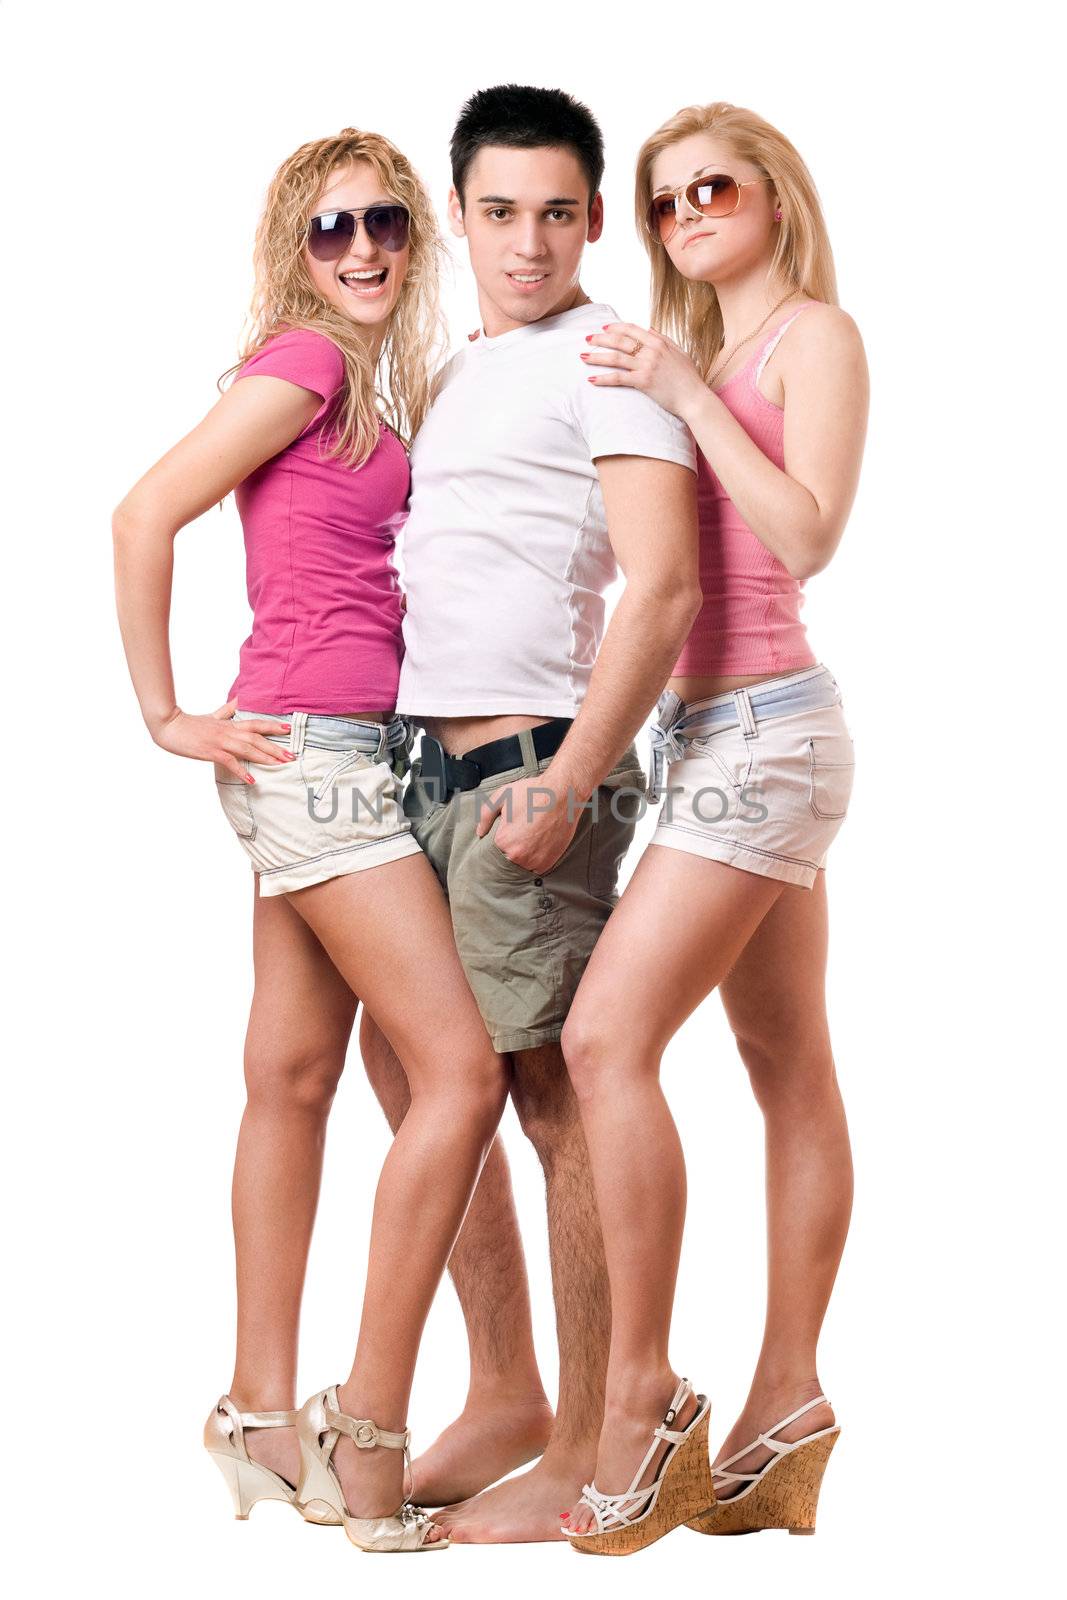 Handsome young man and two girls. Isolated on white